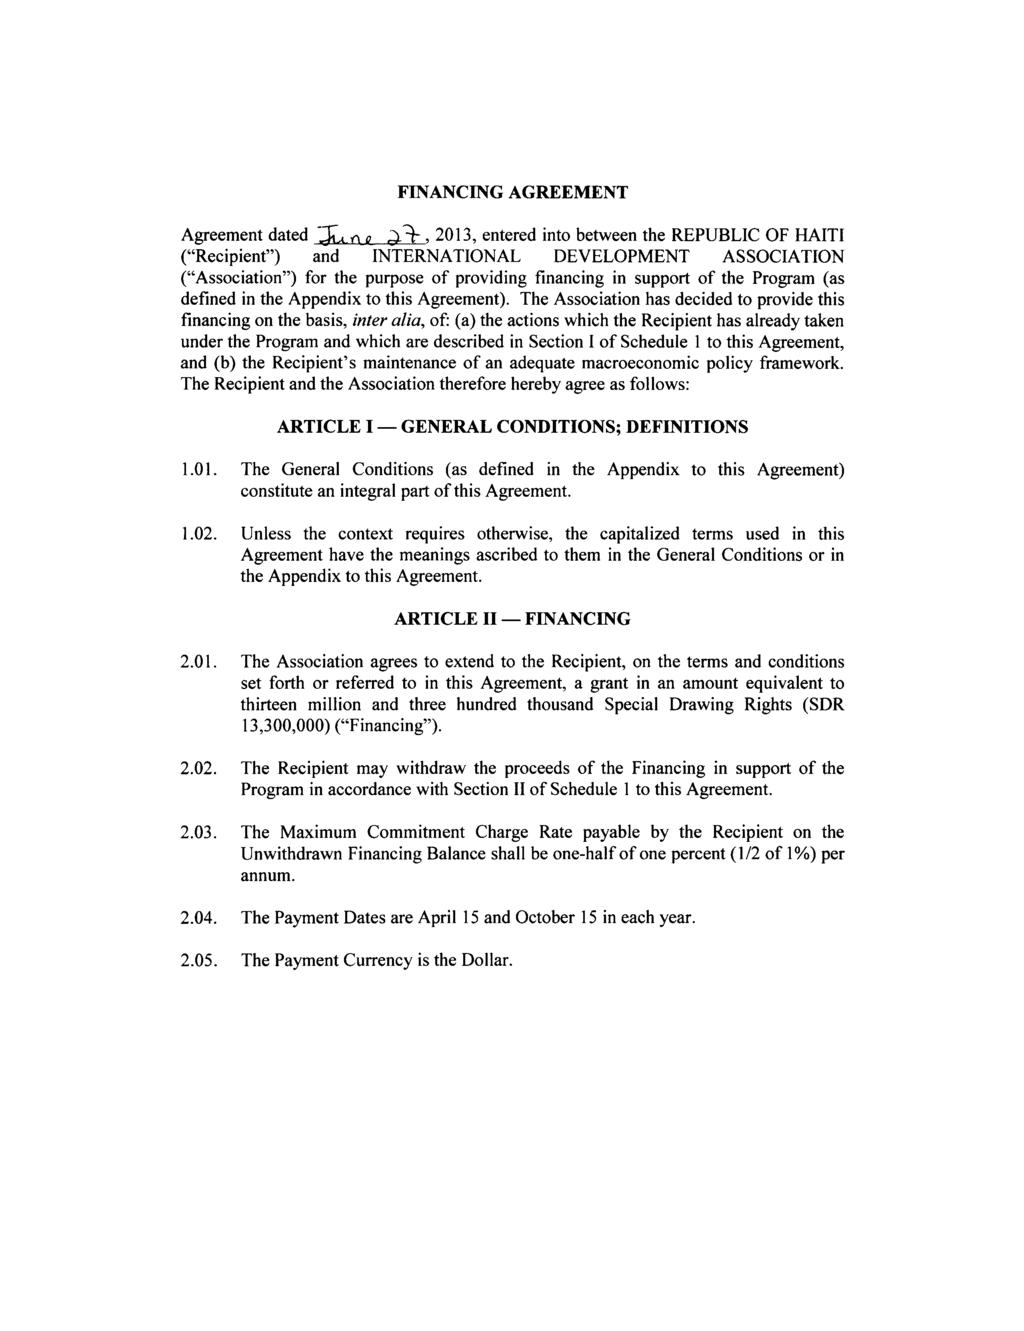 FINANCING AGREEMENT Agreement dated 4-a-, 2013, entered into between the REPUBLIC OF HAITI ("Recipient") and INTERNATIONAL DEVELOPMENT ASSOCIATION ("Association") for the purpose of providing